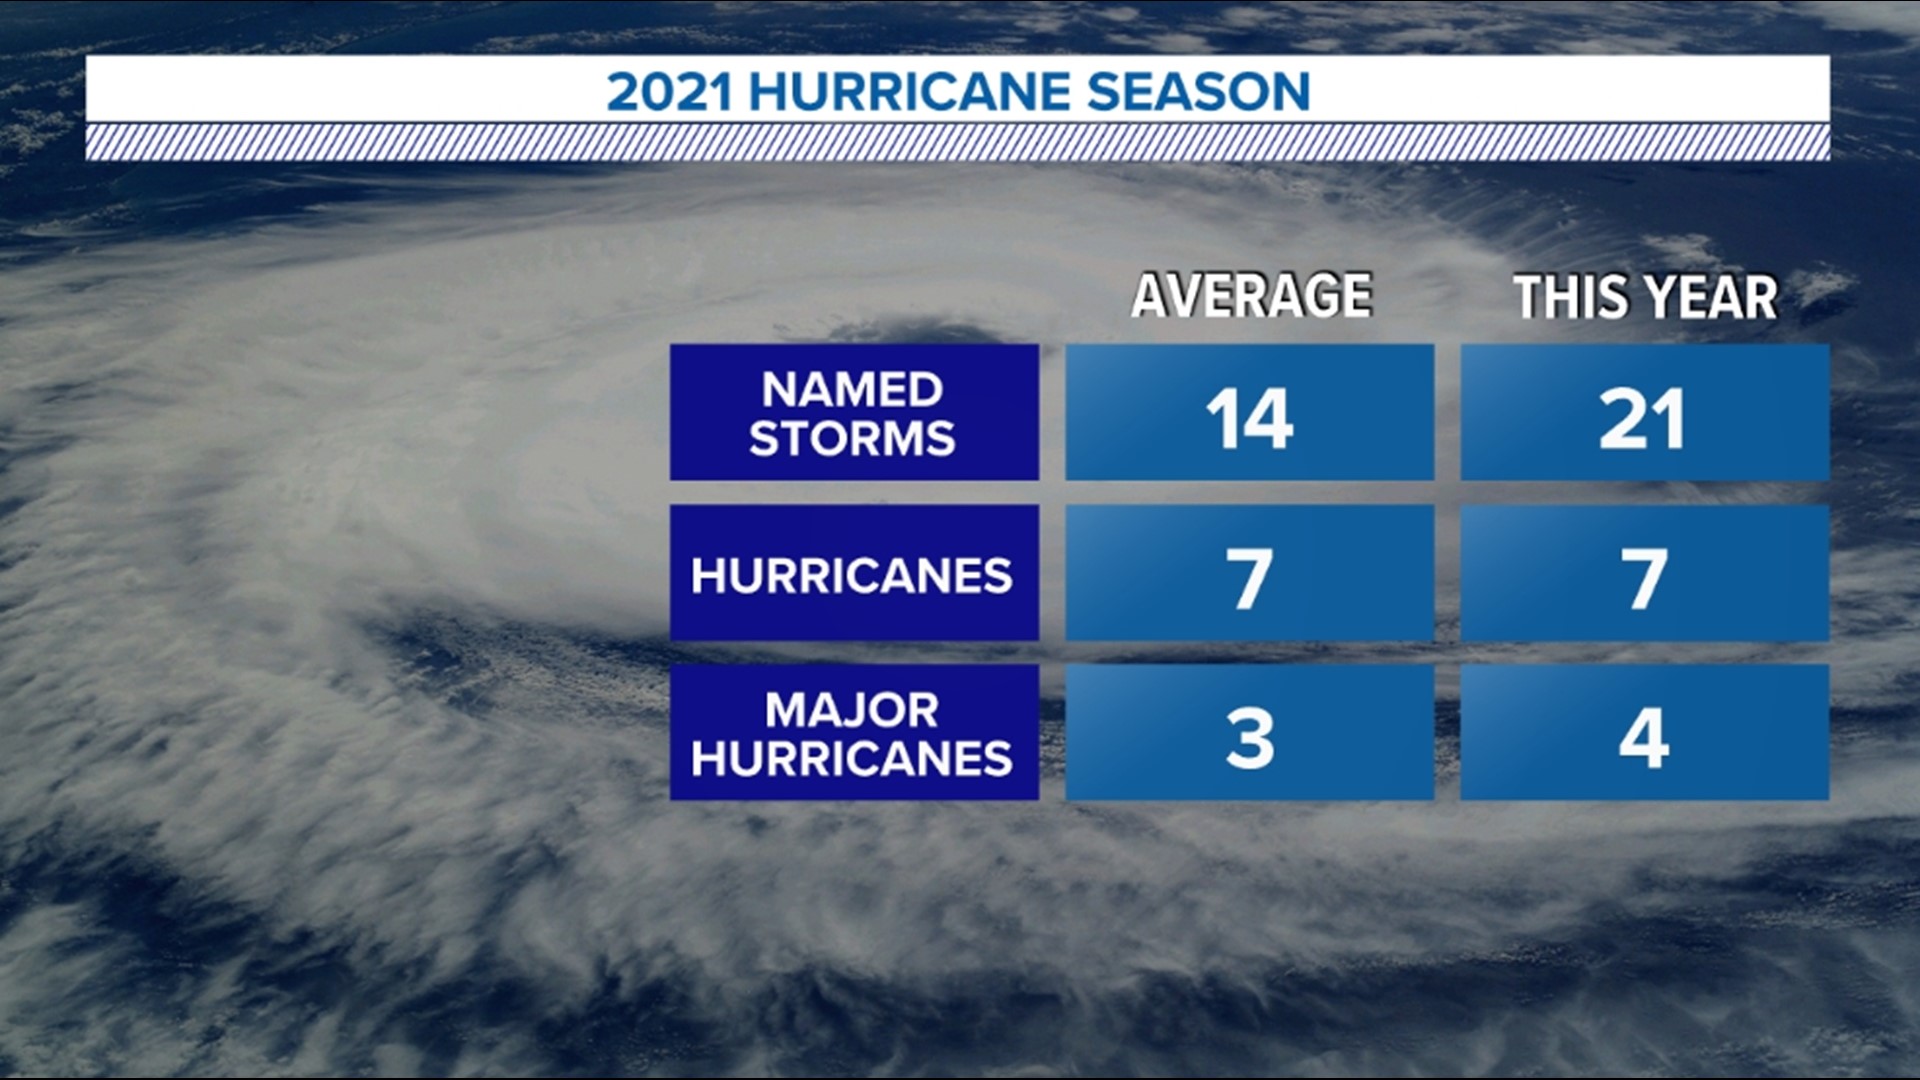 It was the third most active year on record in terms of named storms, with a total of 21.